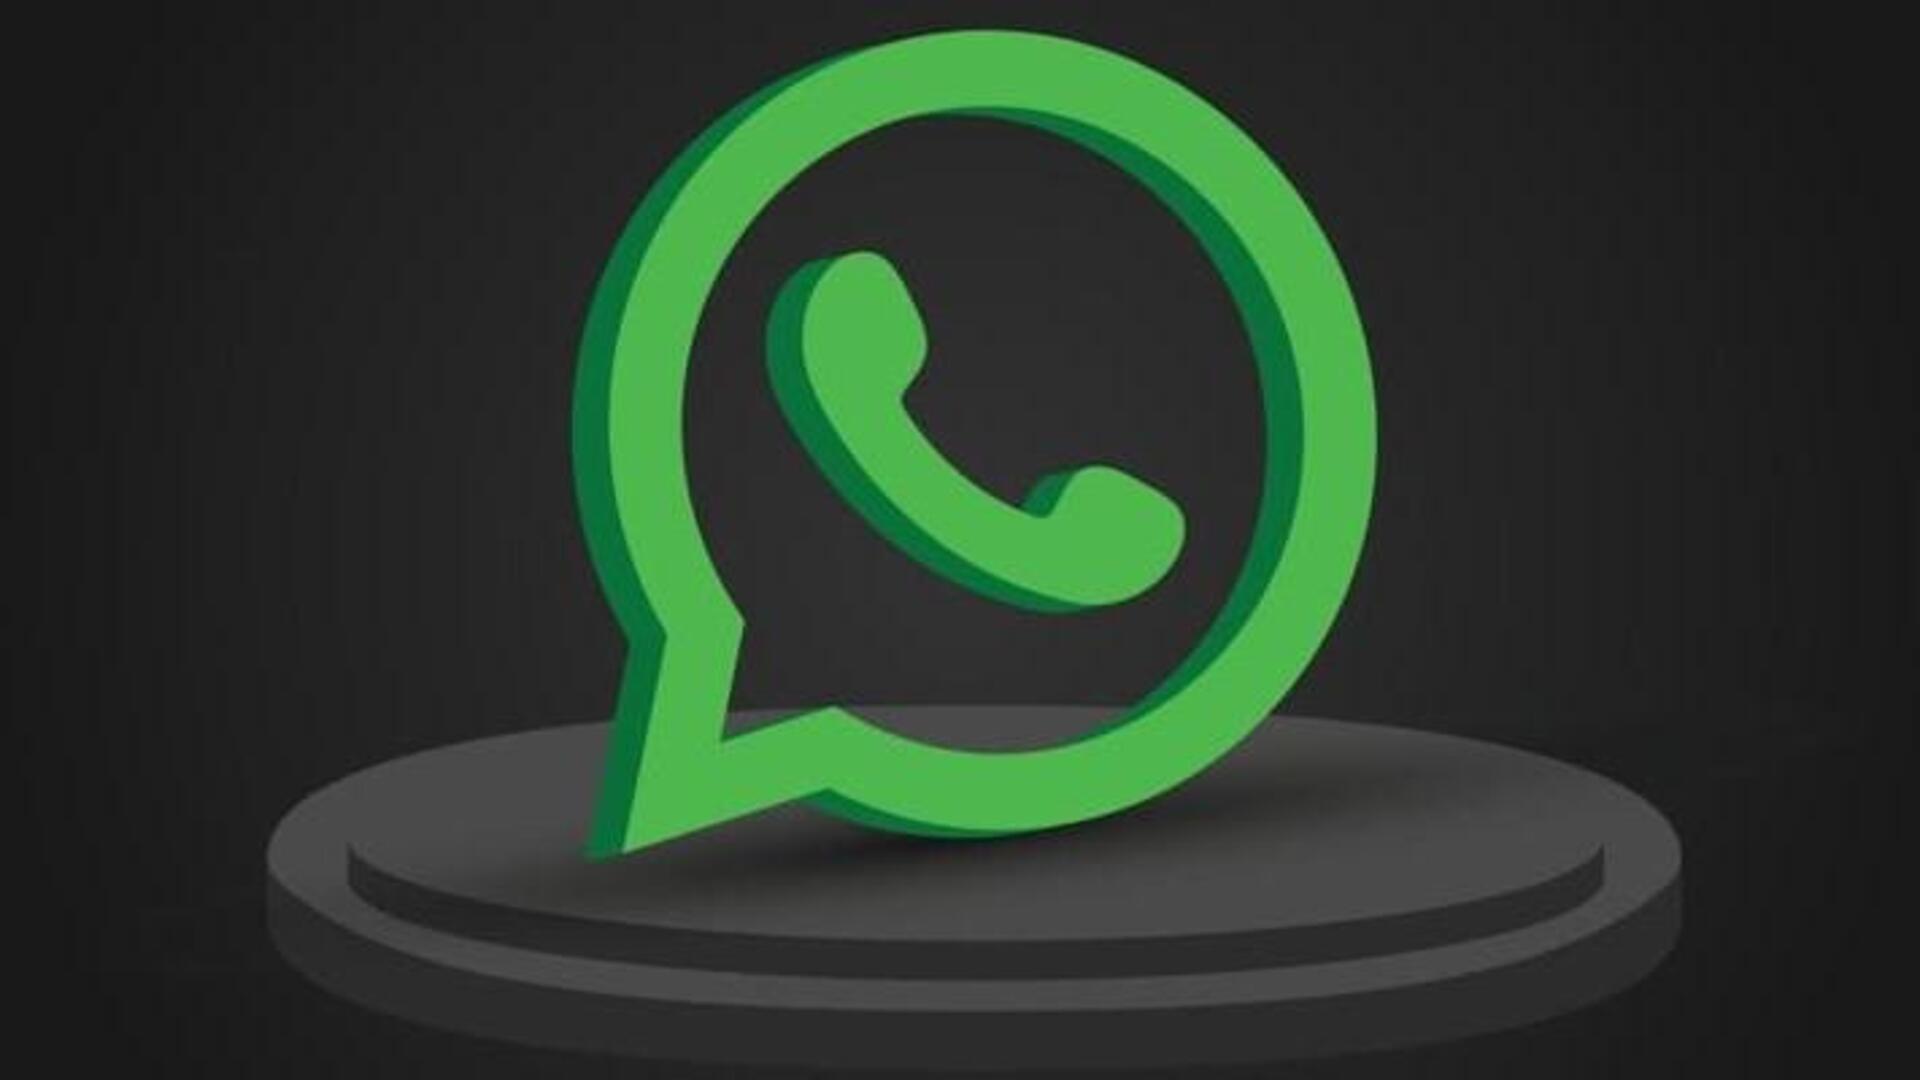 WhatsApp beta lets users view status updates within chat screen